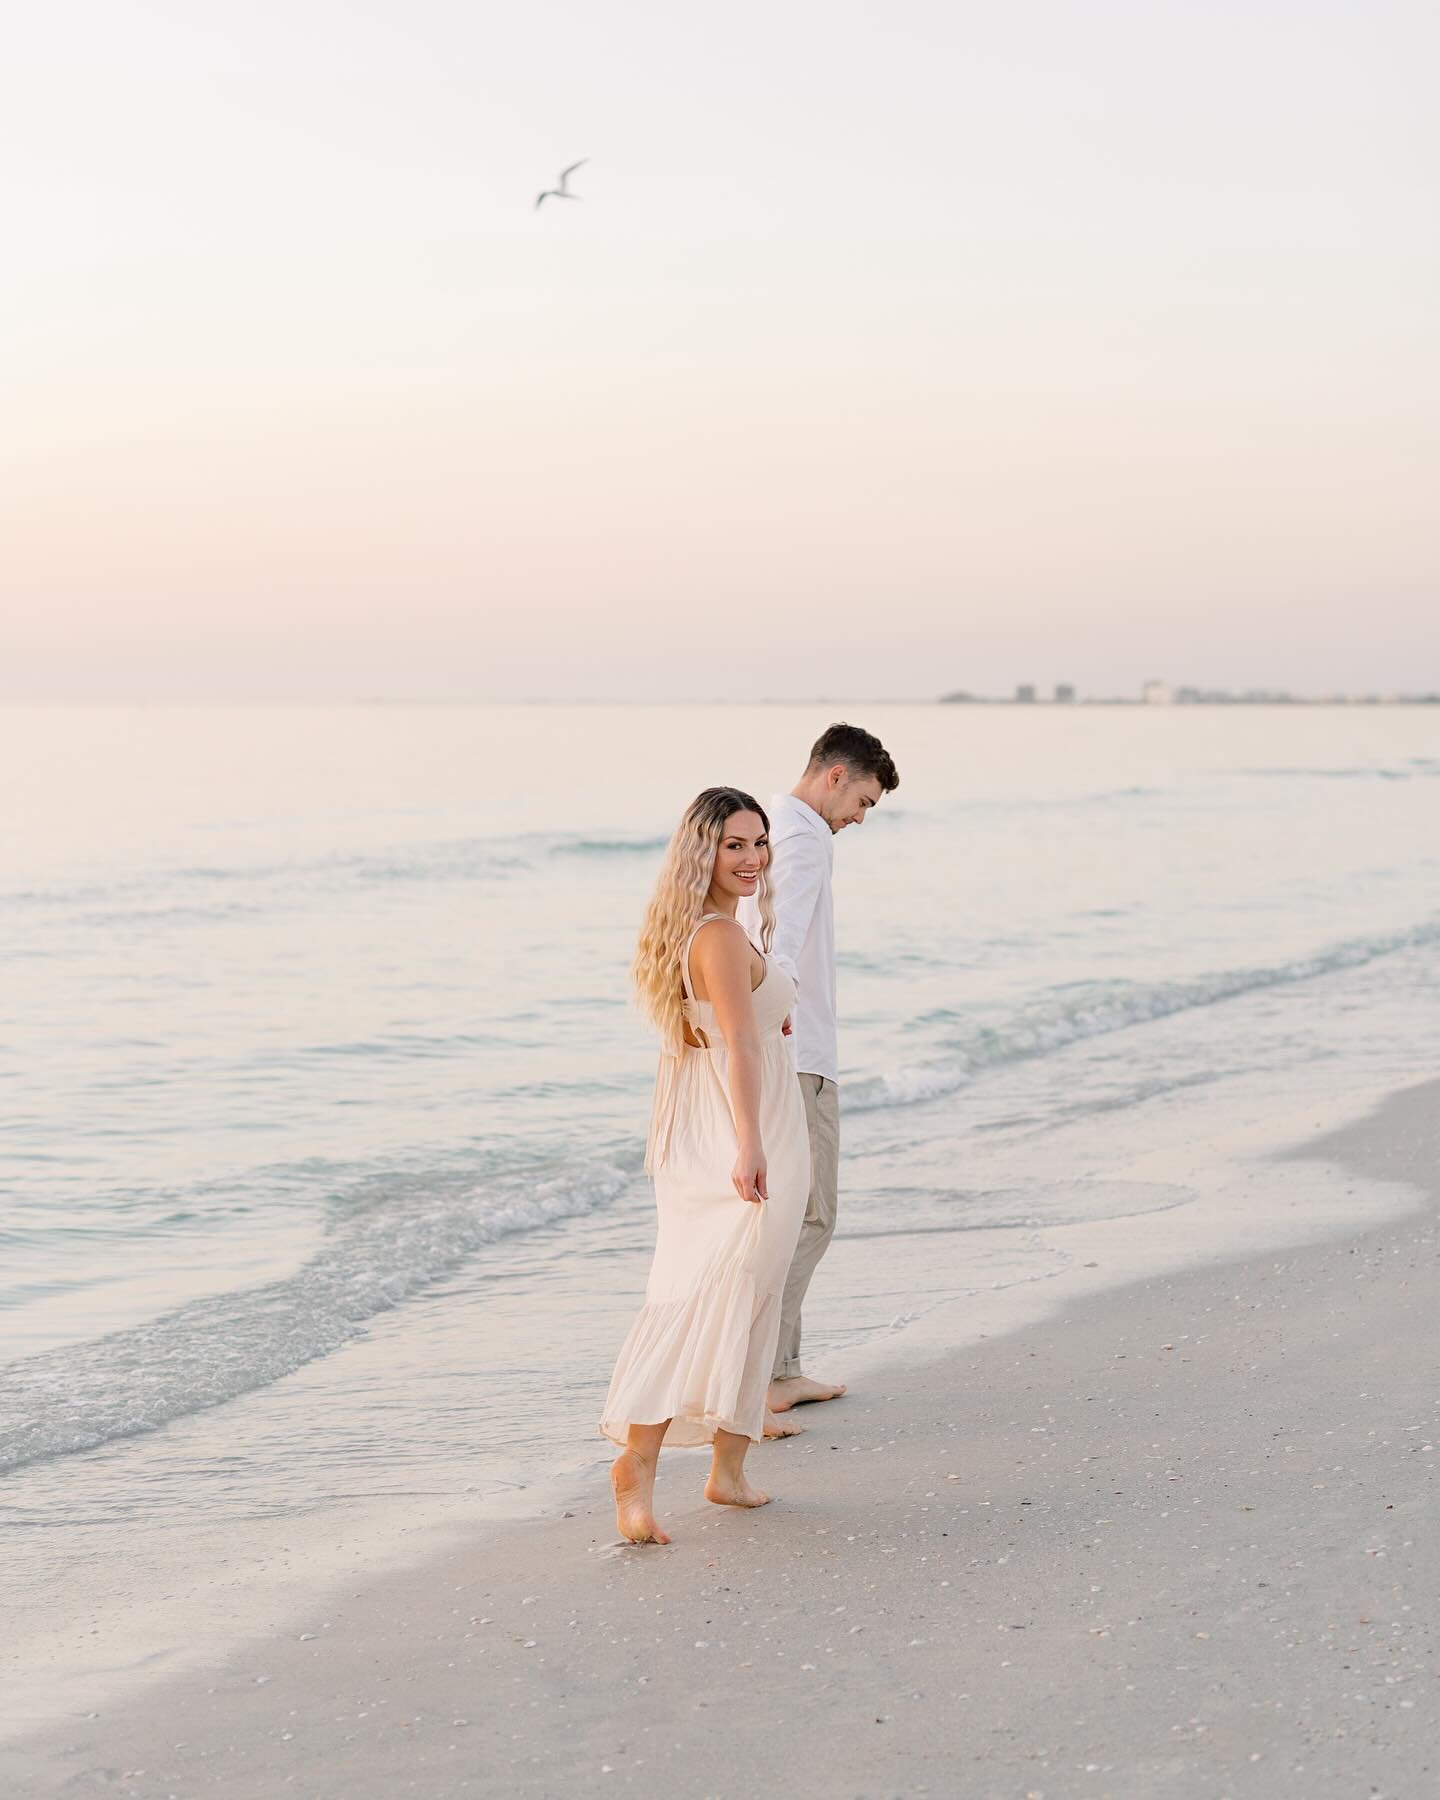 Take me back to pastel skies and sunsets strolls. 🐚Also more engagement sessions where frolicking in the sand and water are a requirement.